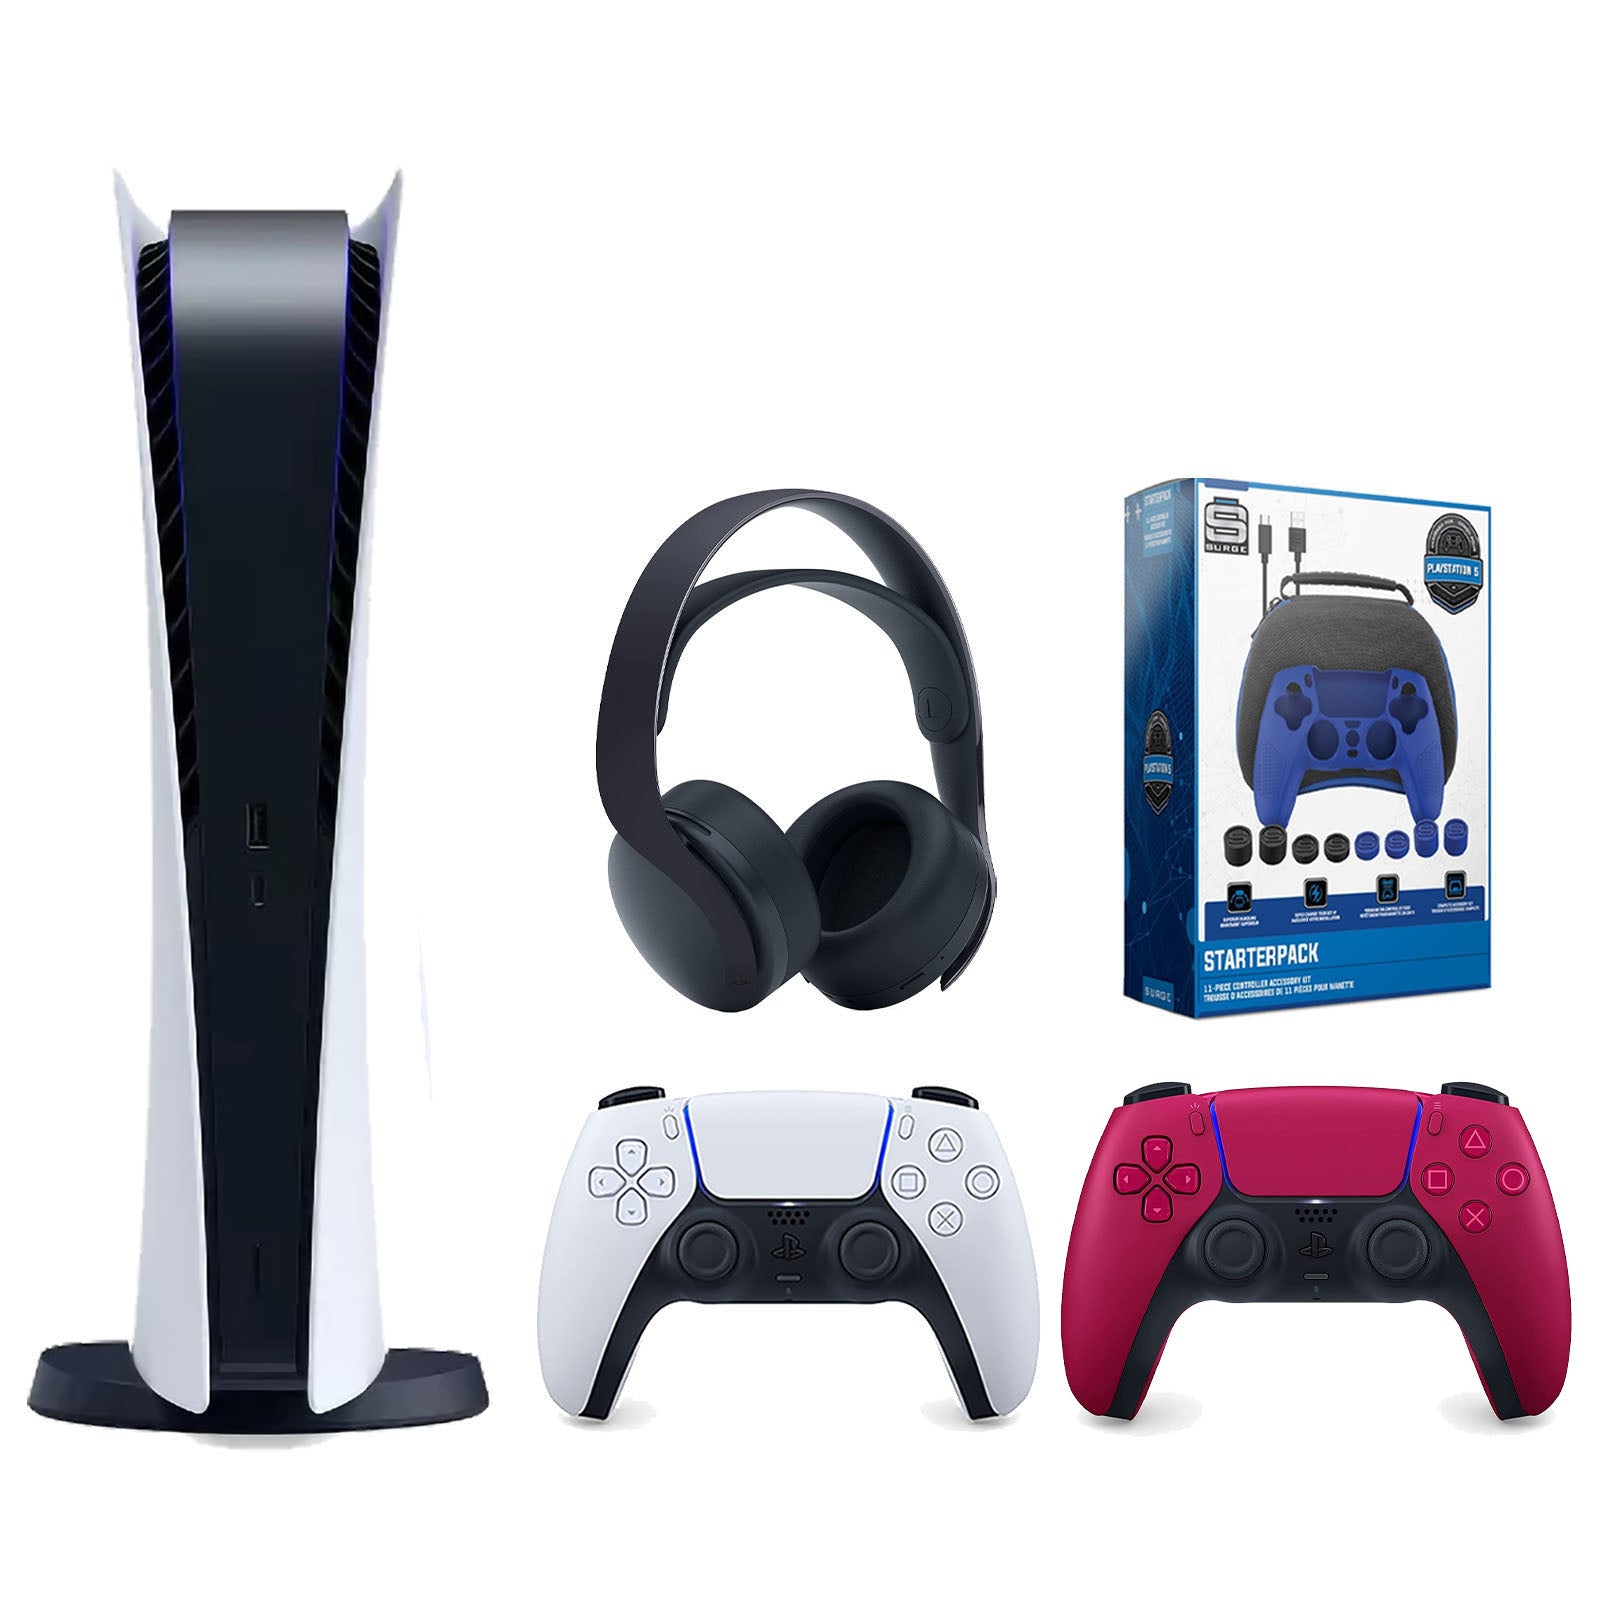 Sony Playstation 5 Digital Edition Console with Extra Red Controller, Black PULSE 3D Headset and Surge Pro Gamer Starter Pack 11-Piece Accessory Bundle - Pro-Distributing